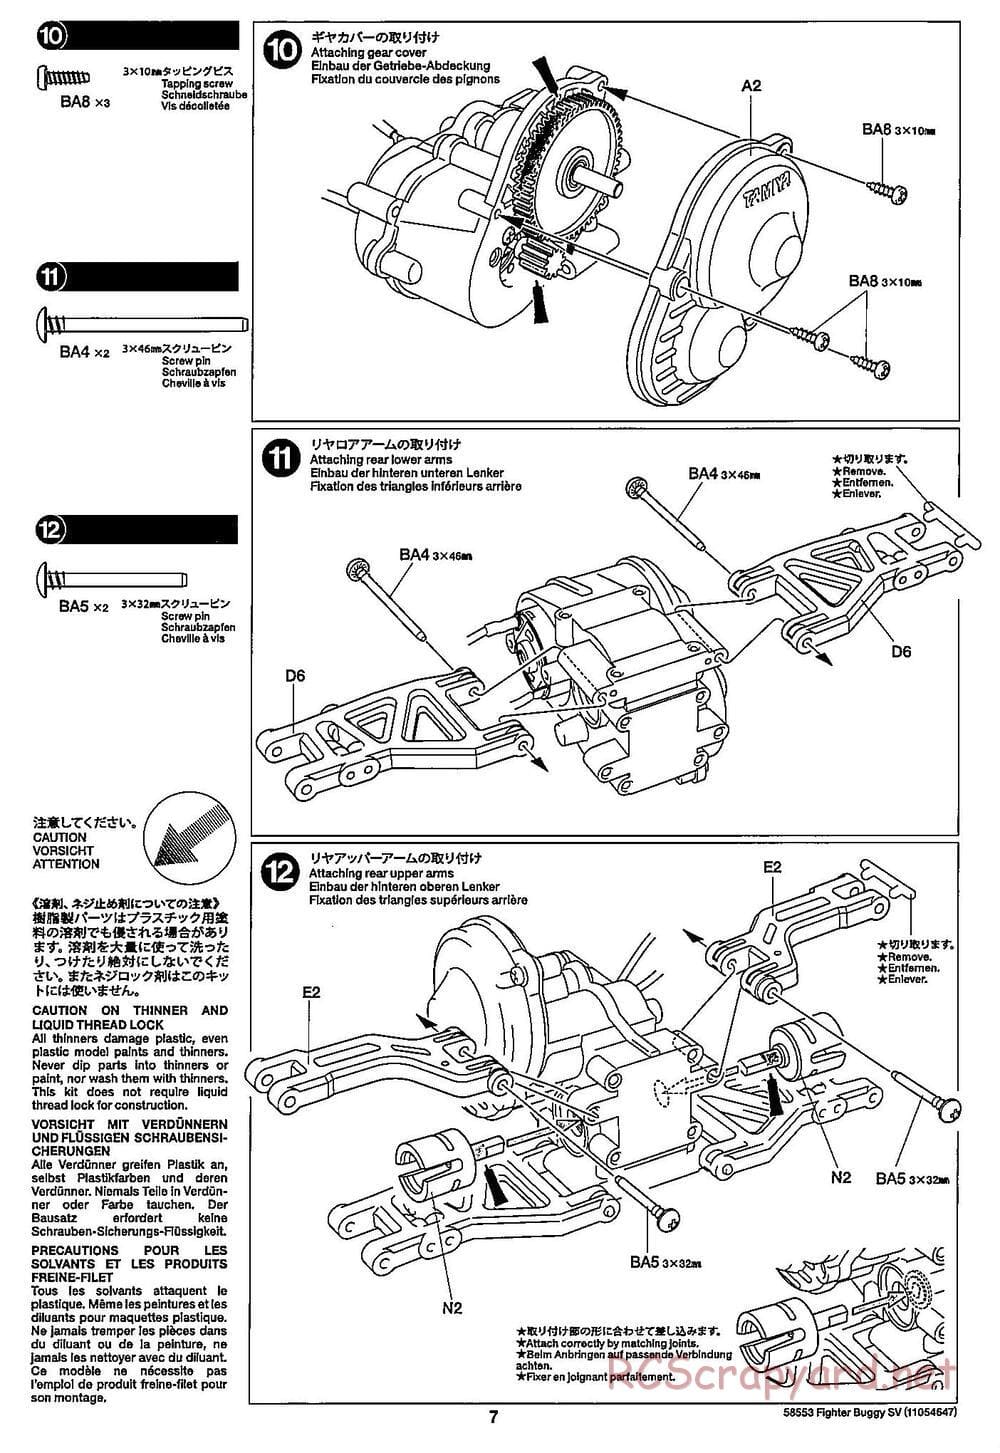 Tamiya - Fighter Buggy SV Chassis - Manual - Page 7